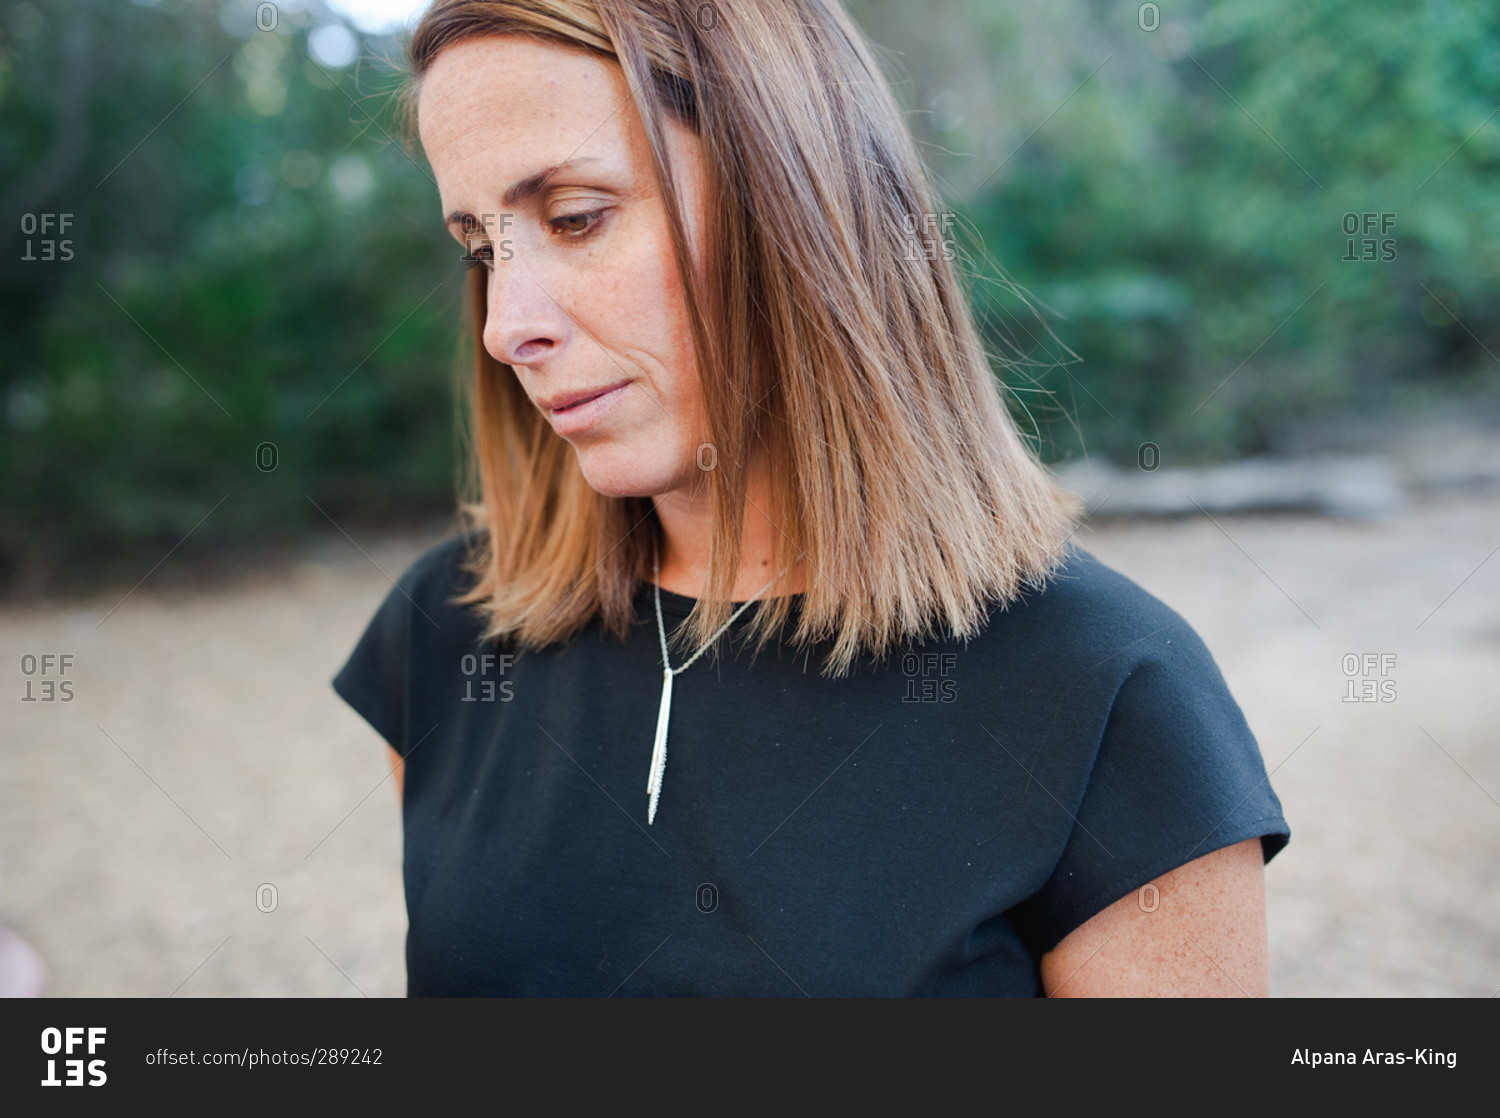 Profile of a woman looking sad